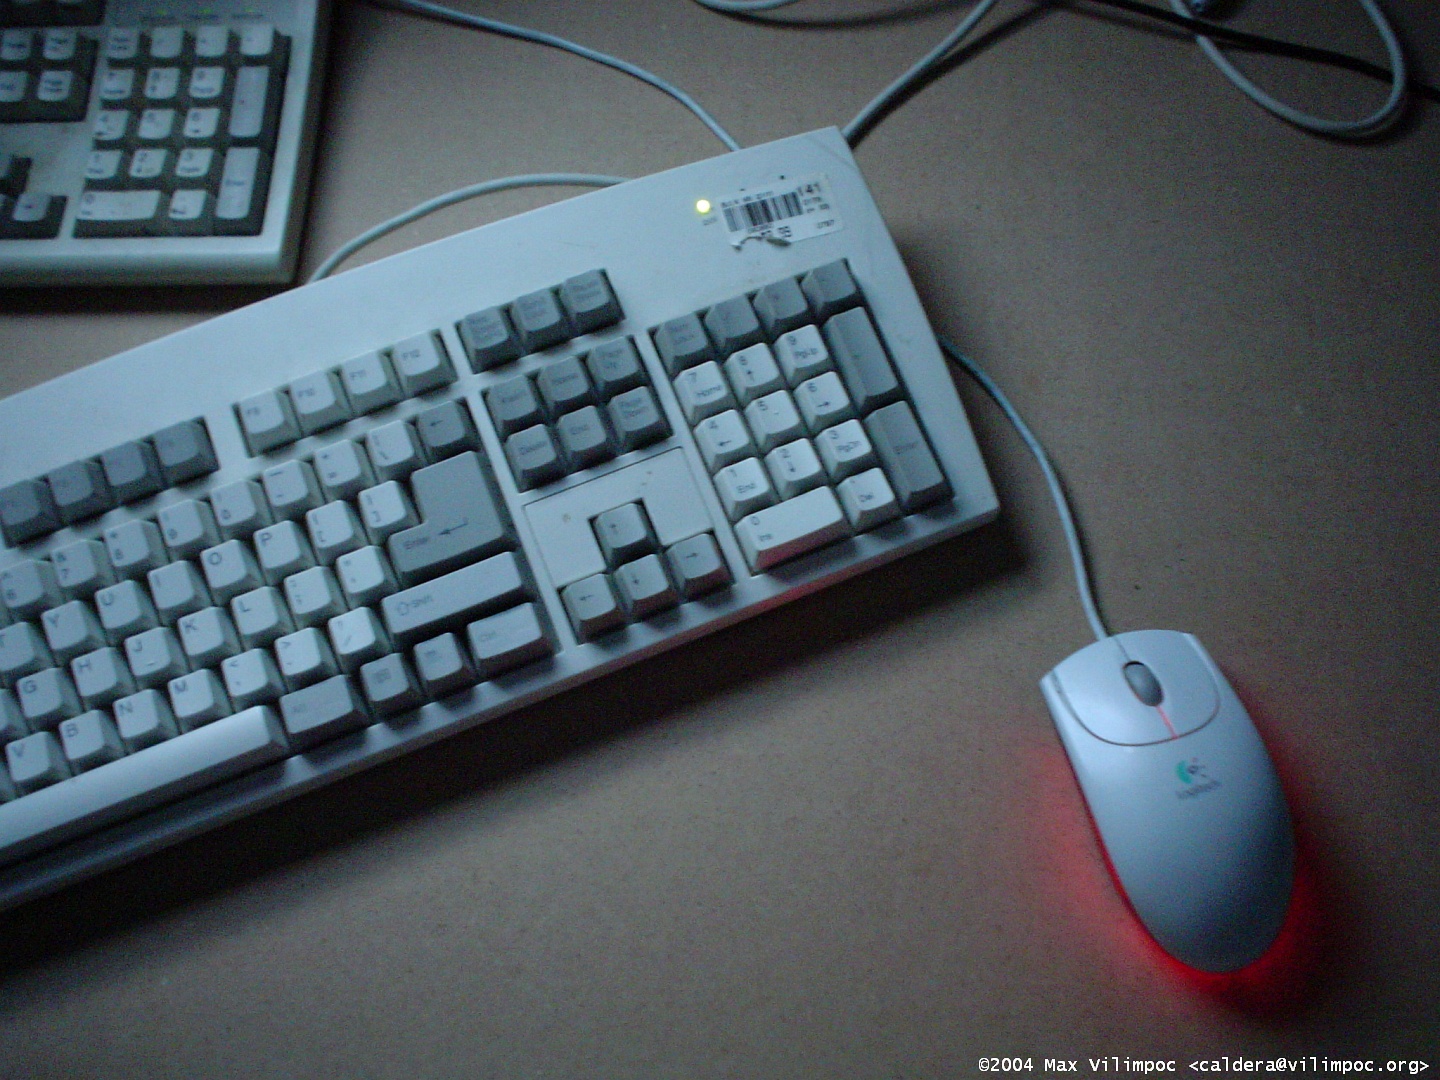 Two wire US English keyboards, both partially obscured at the left edge of the picture, and a Logitech wired mouse with the red glow of the sensor LED visible